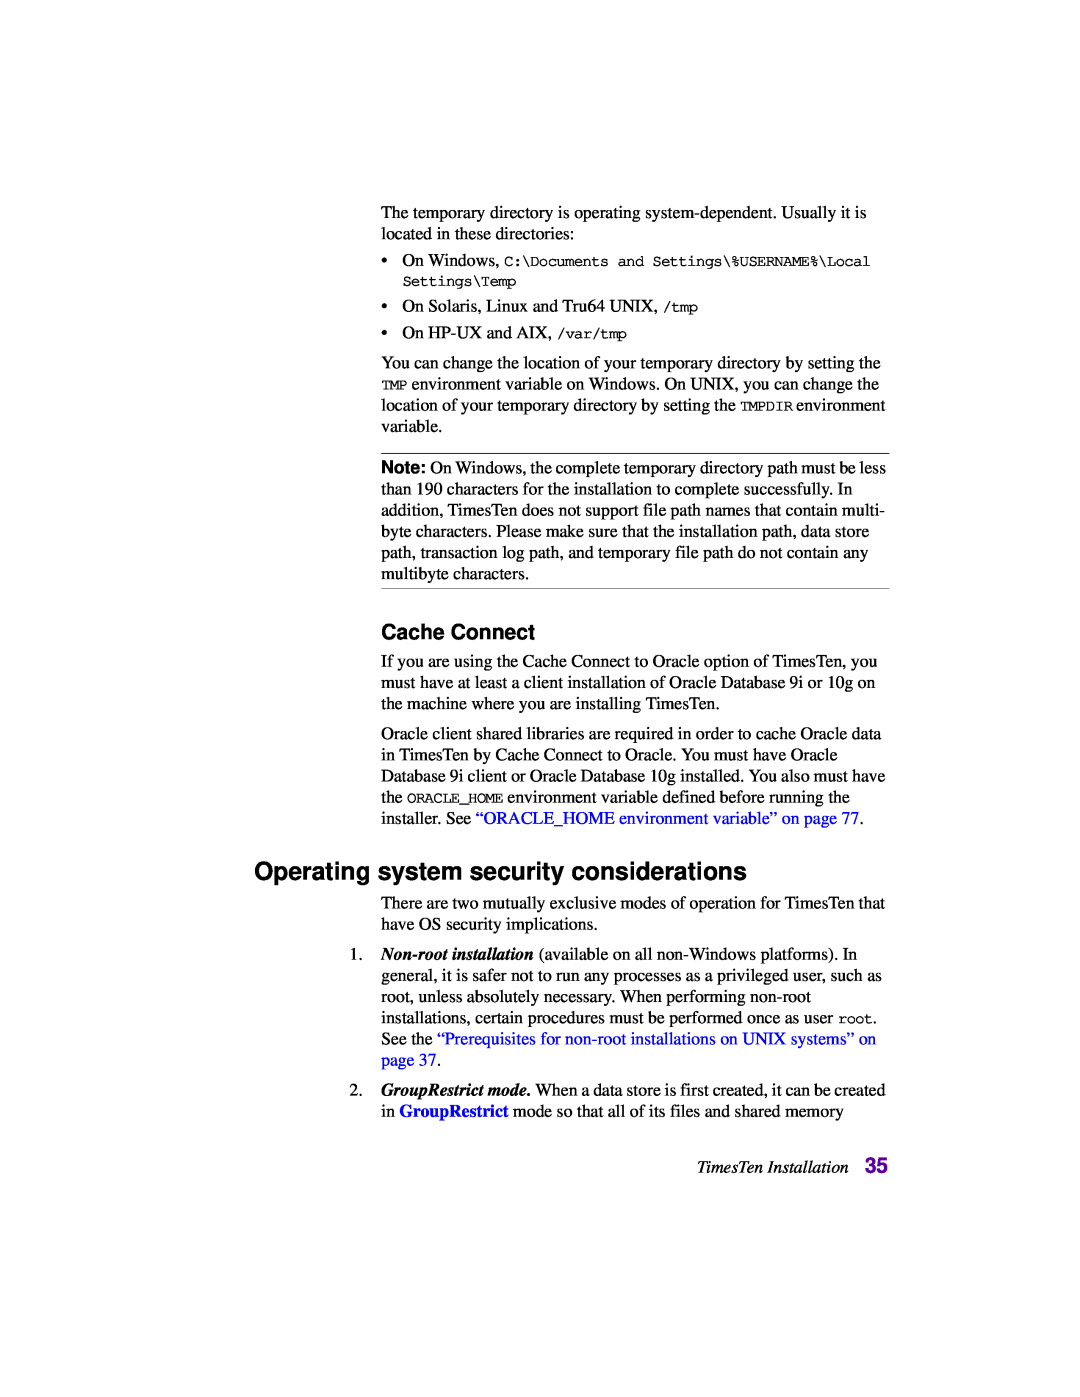 Oracle Audio Technologies B31679-01 manual Operating system security considerations, Cache Connect 